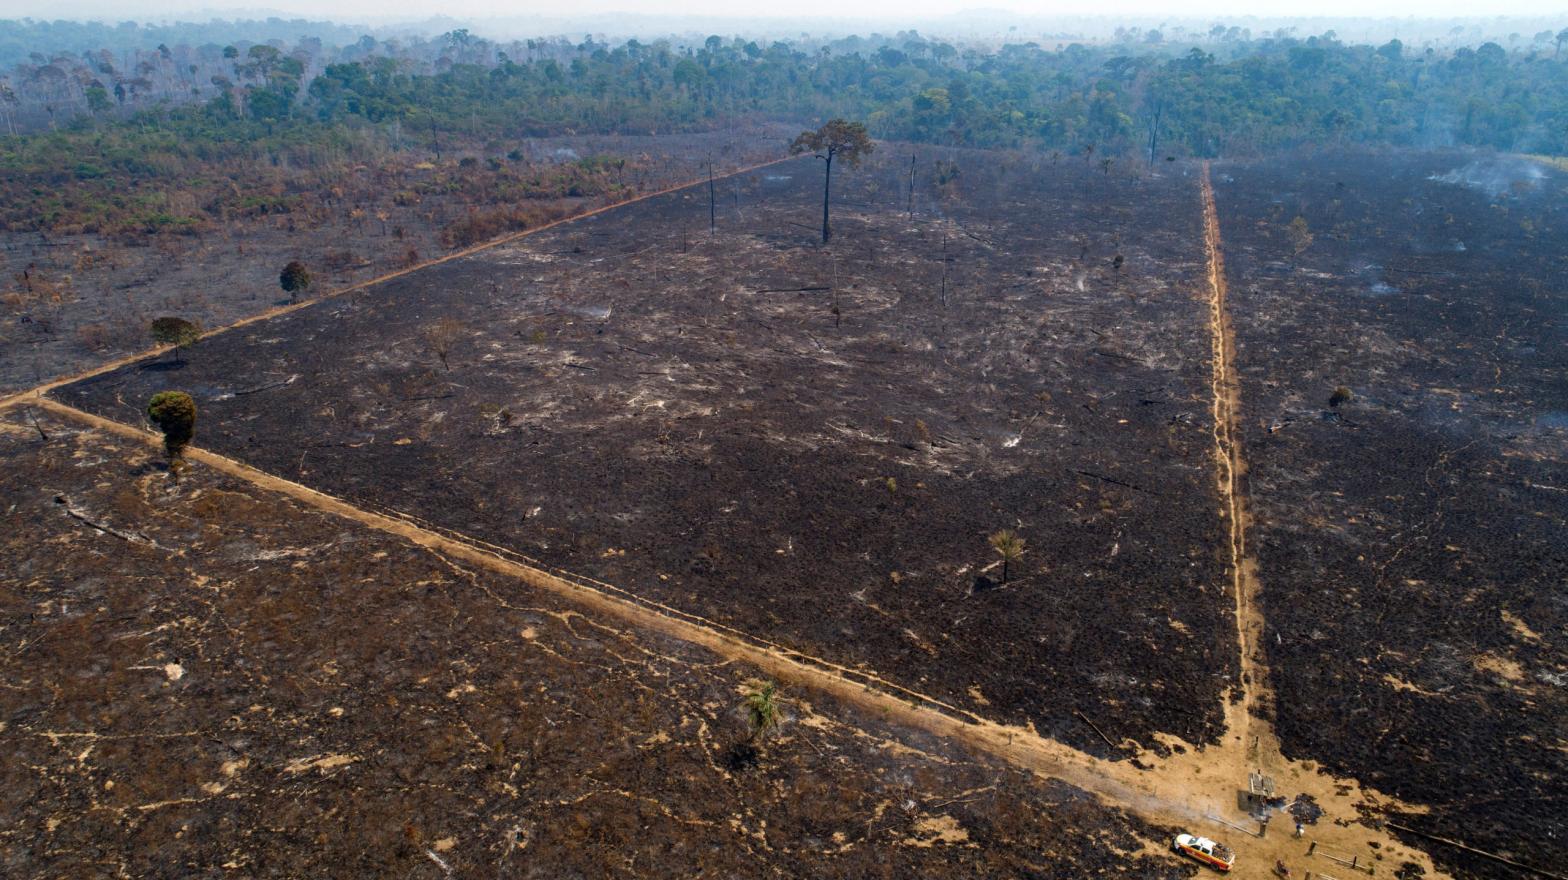 An area consumed by fire and cleared near Novo Progresso in Para state, Brazil. (Photo: Andre Penner, AP)